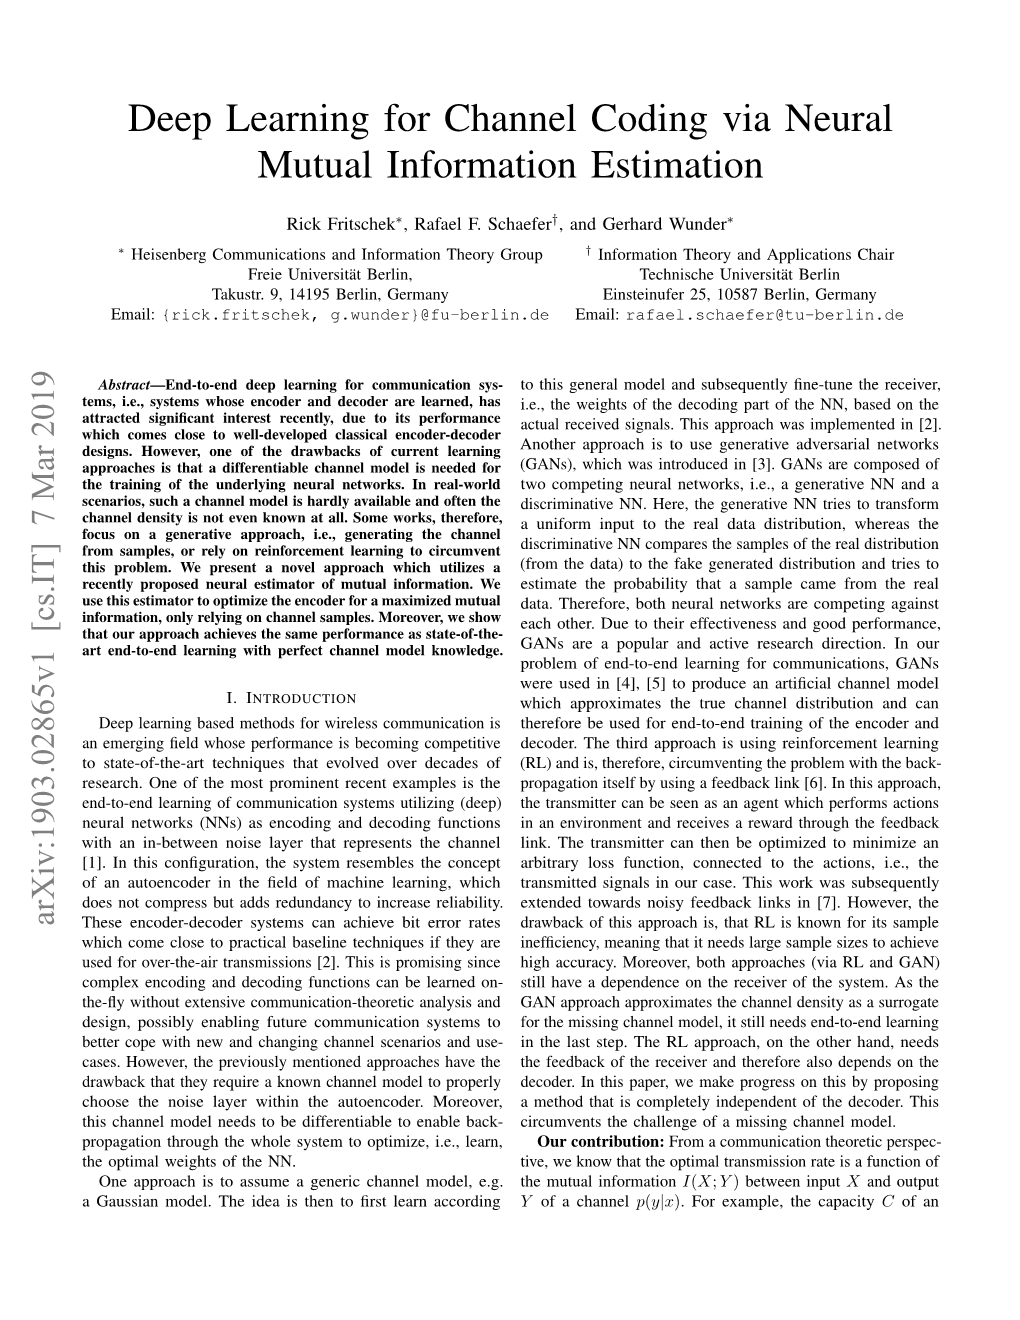 Deep Learning for Channel Coding Via Neural Mutual Information Estimation